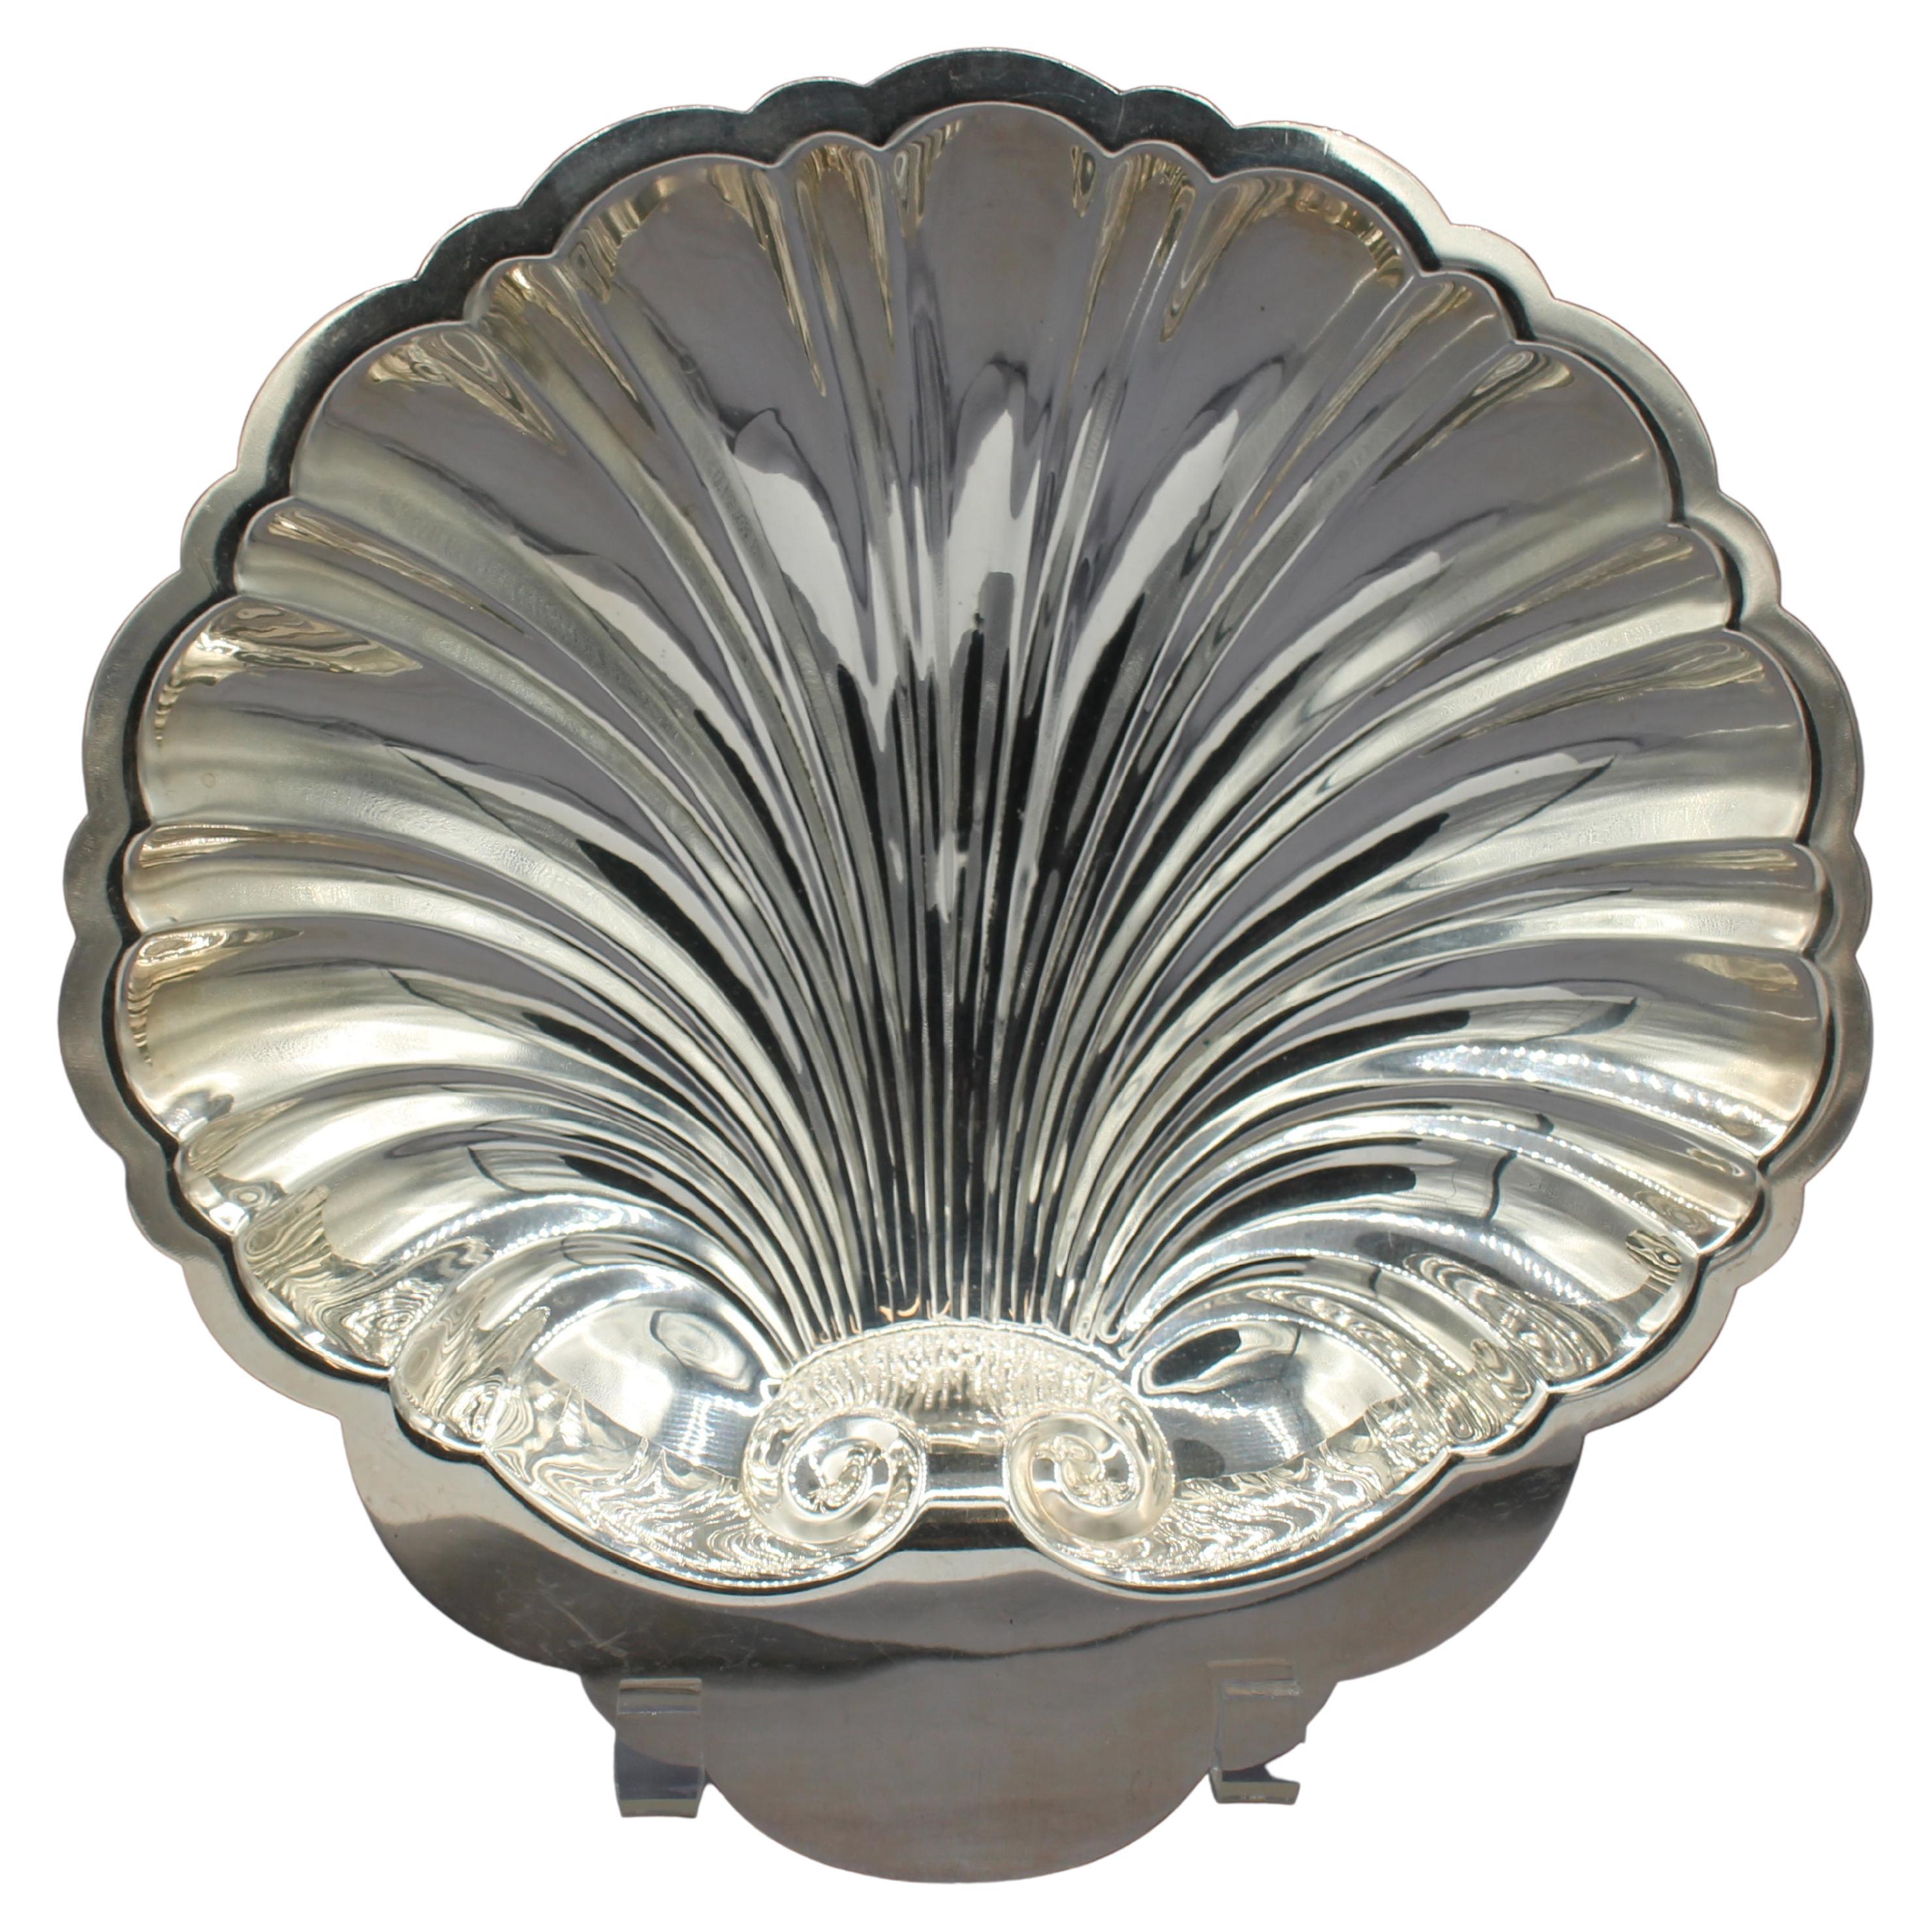 Large Vintage Silver Plated Scallop Shell Dish